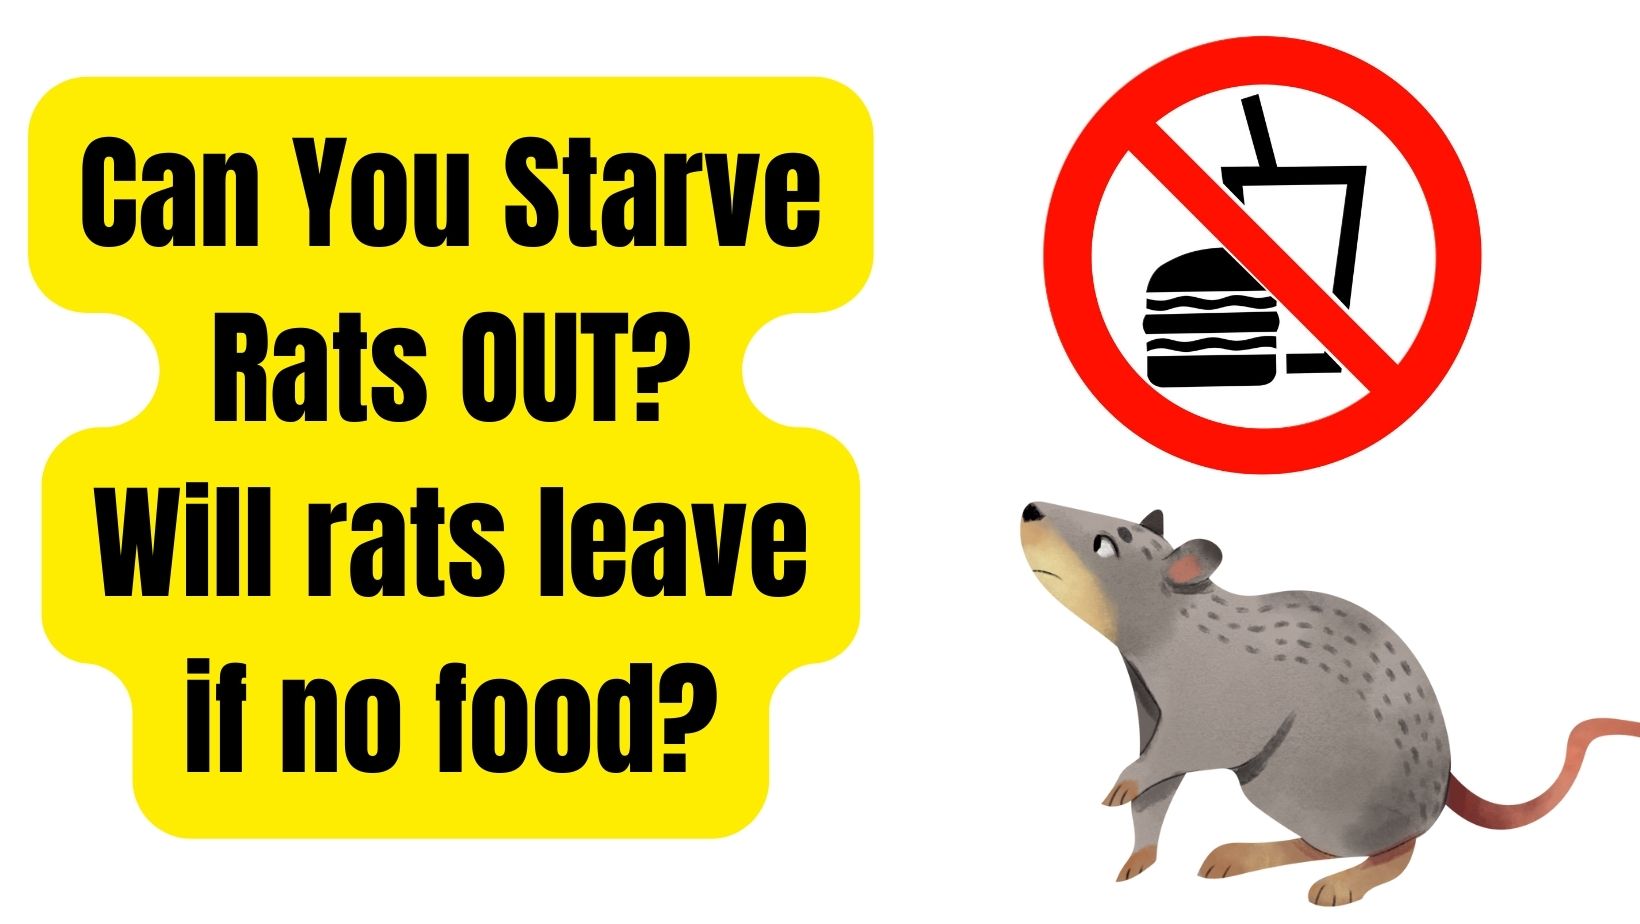 Will Rats Leave If No Food? Does Rat Starvation Works?